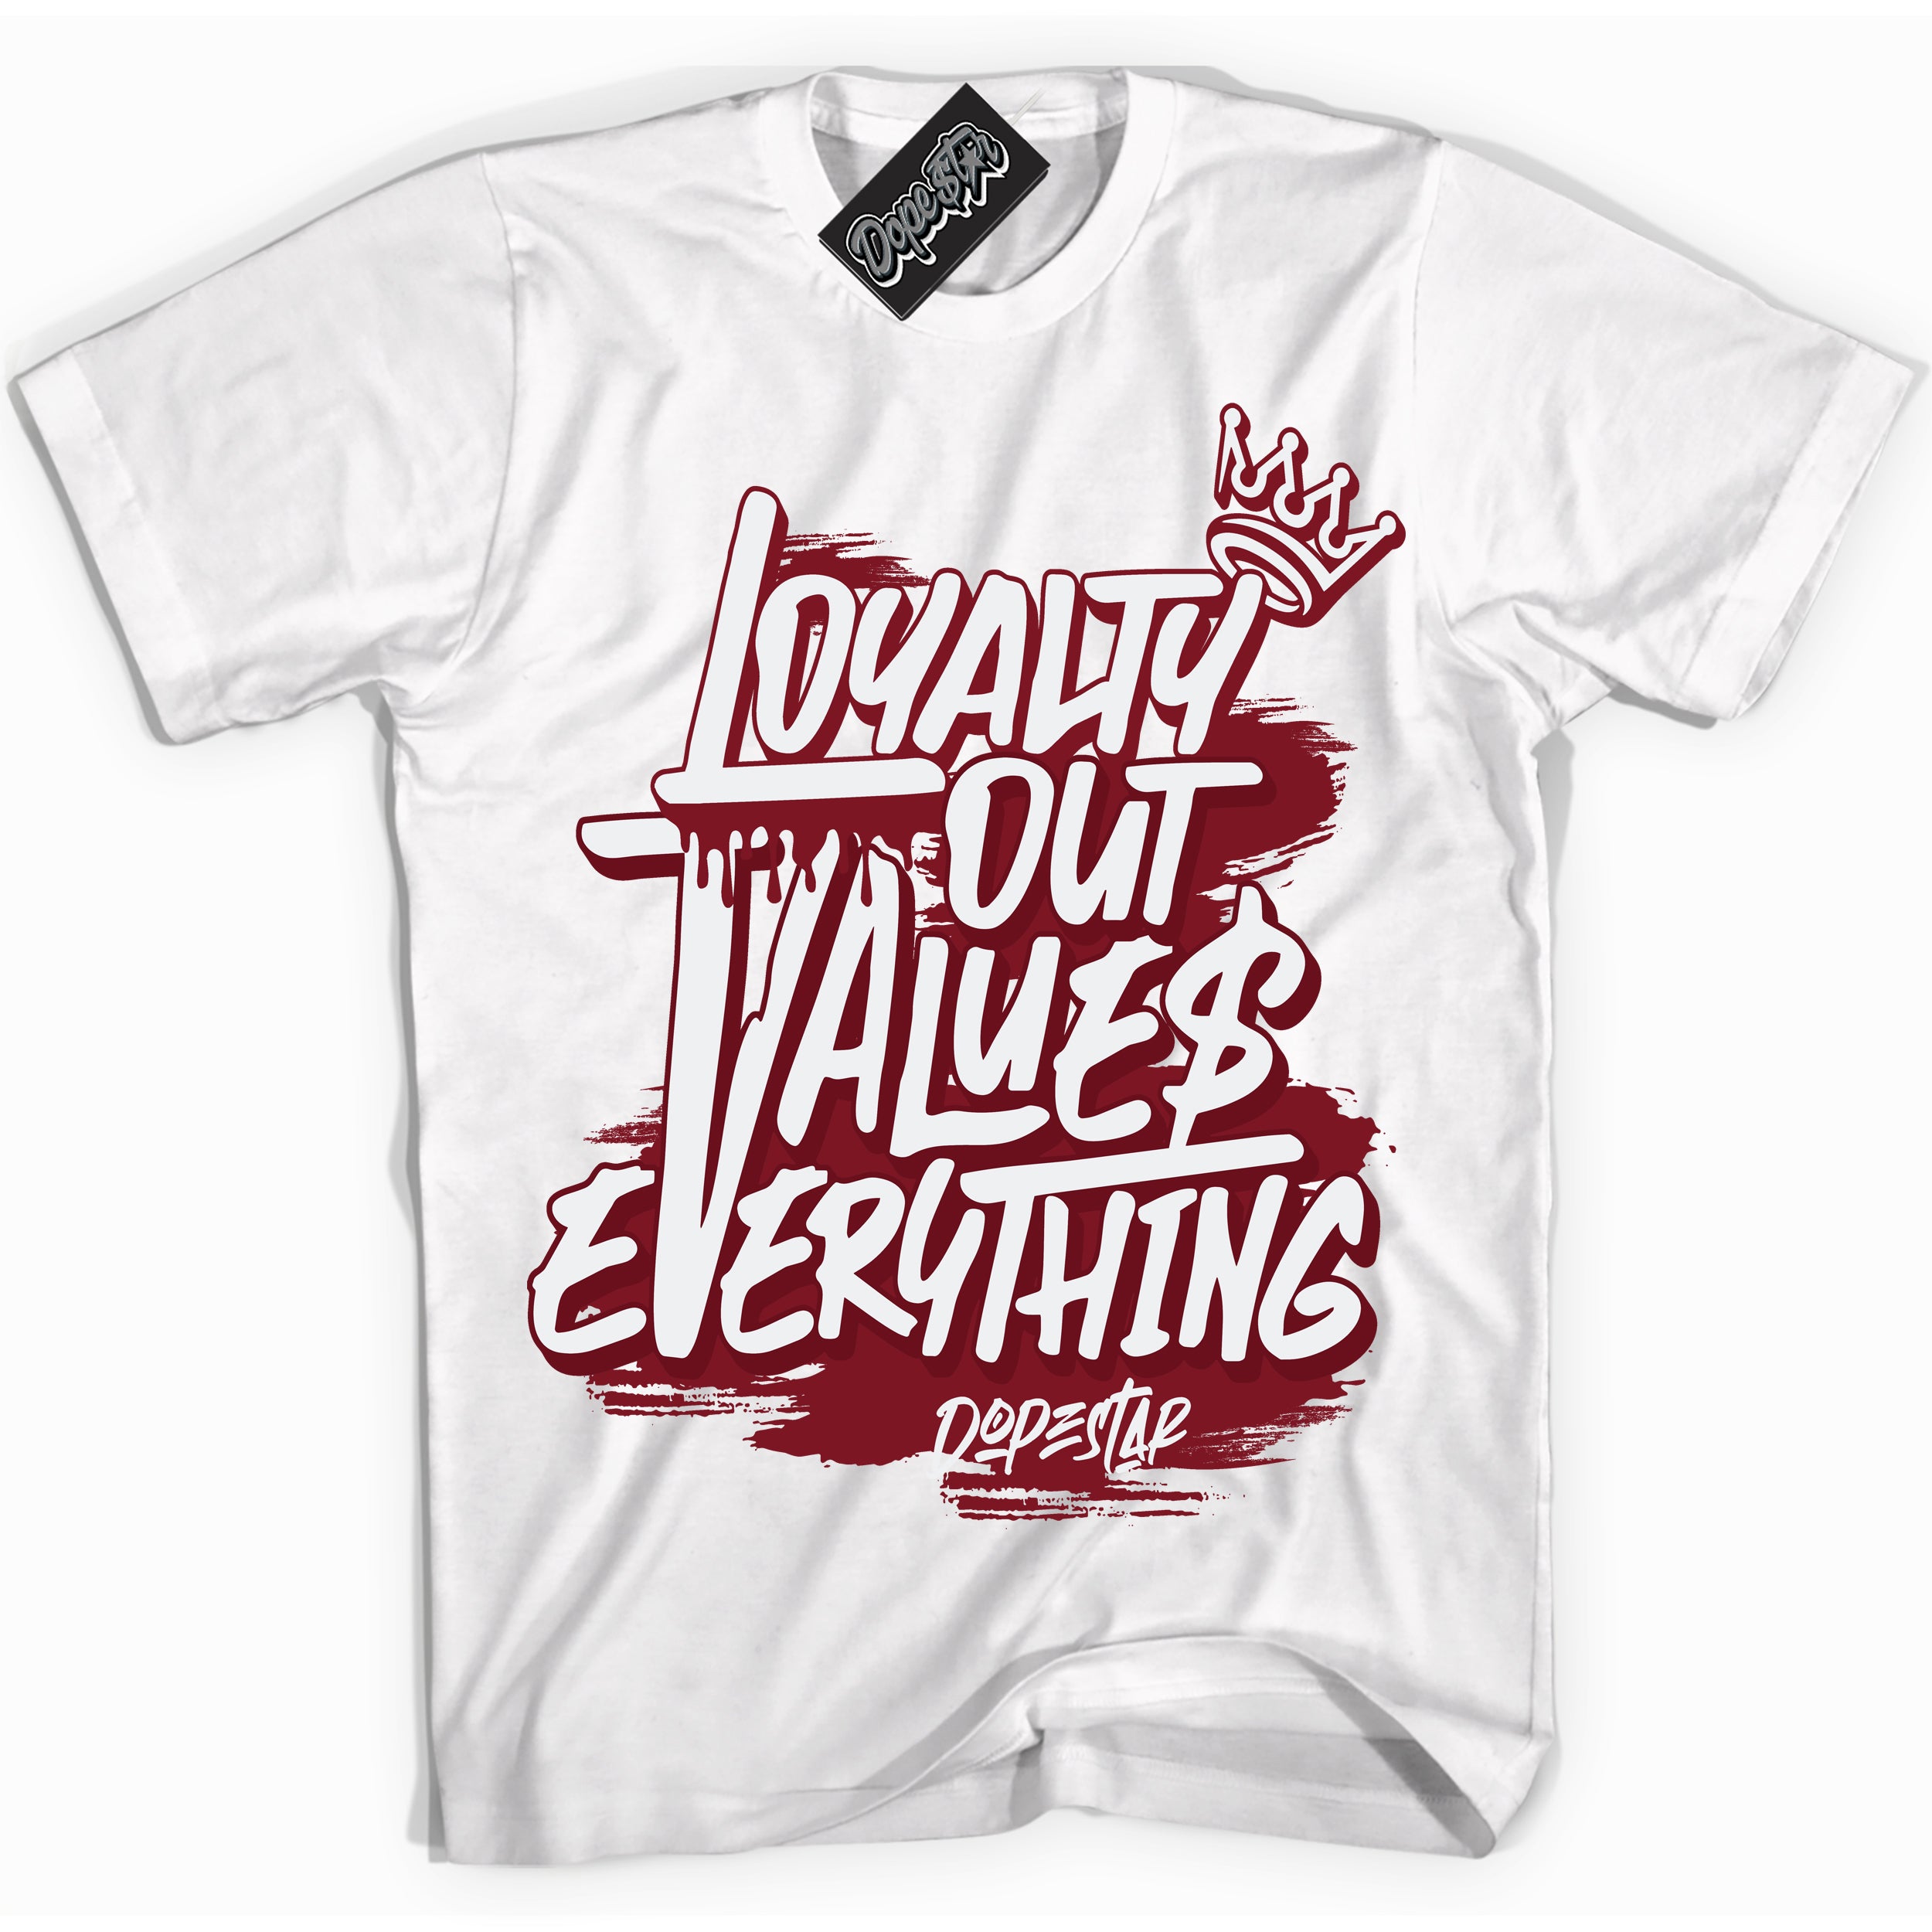 Cool White Shirt with “ Loyalty Out Values Everything” design that perfectly matches Metallic Burgundy 1s Sneakers.